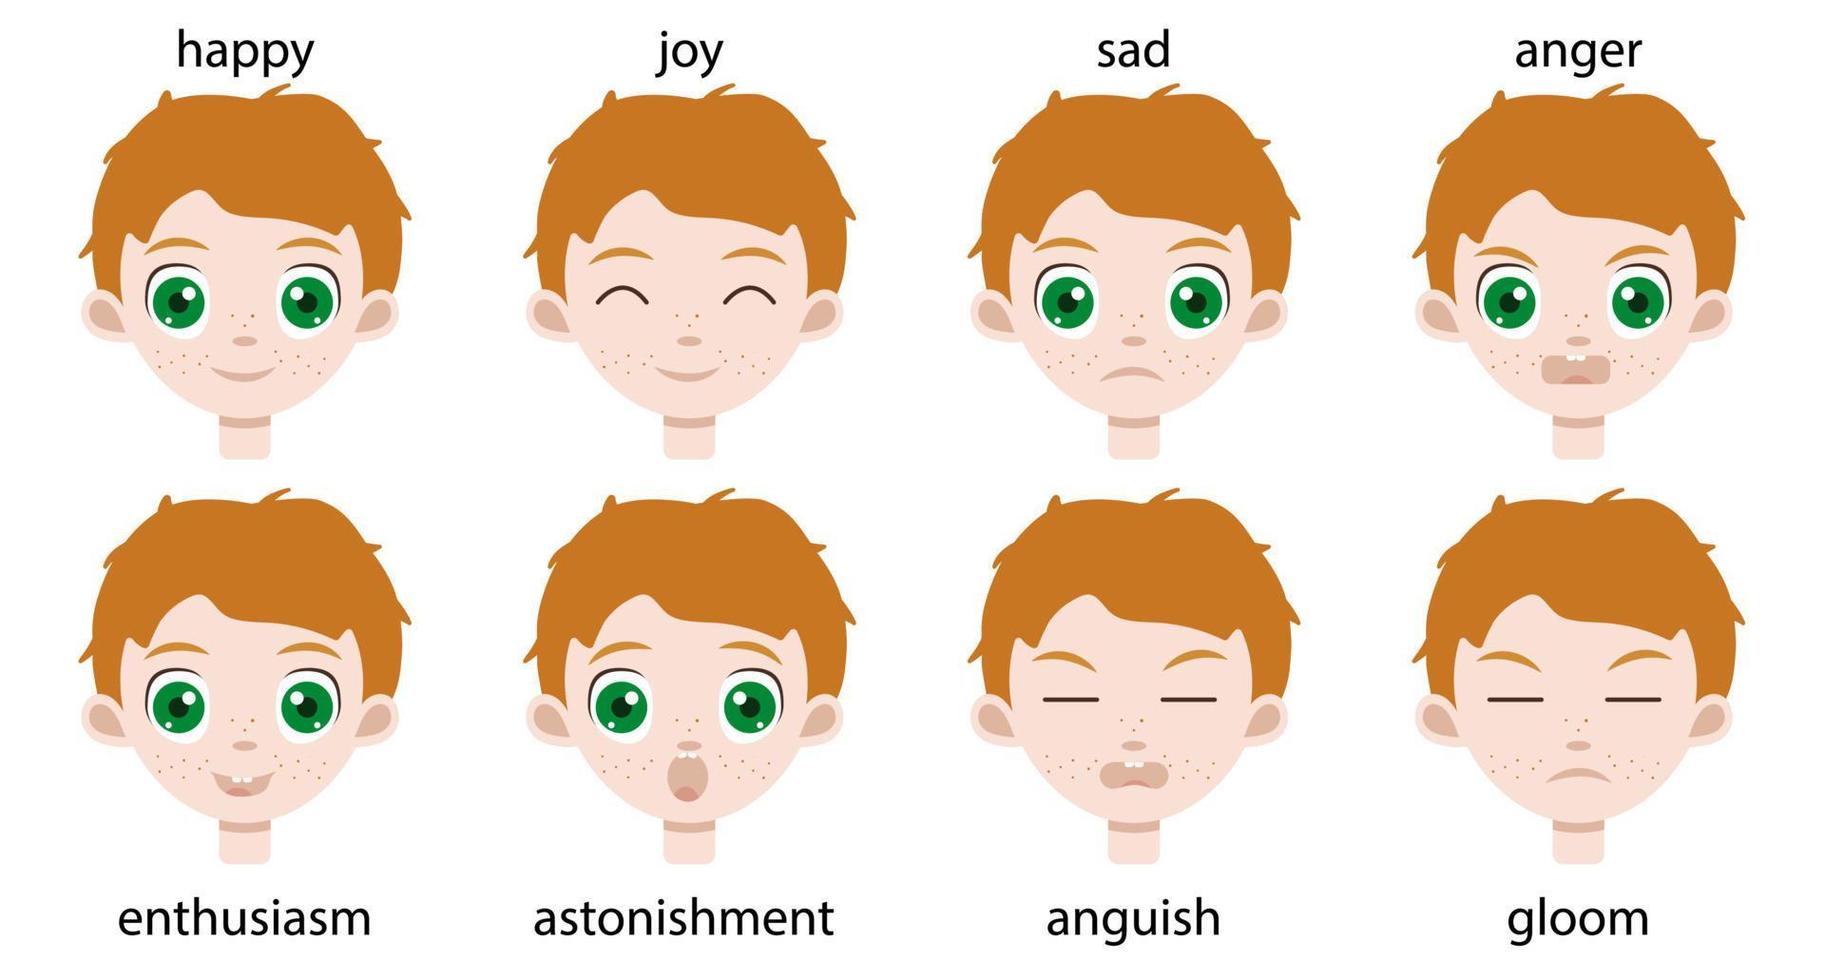 Set of different happy and sad emotions on a red hair toddler face. Cute irish boy portrait with green eyes ued for avatar or stickers vector